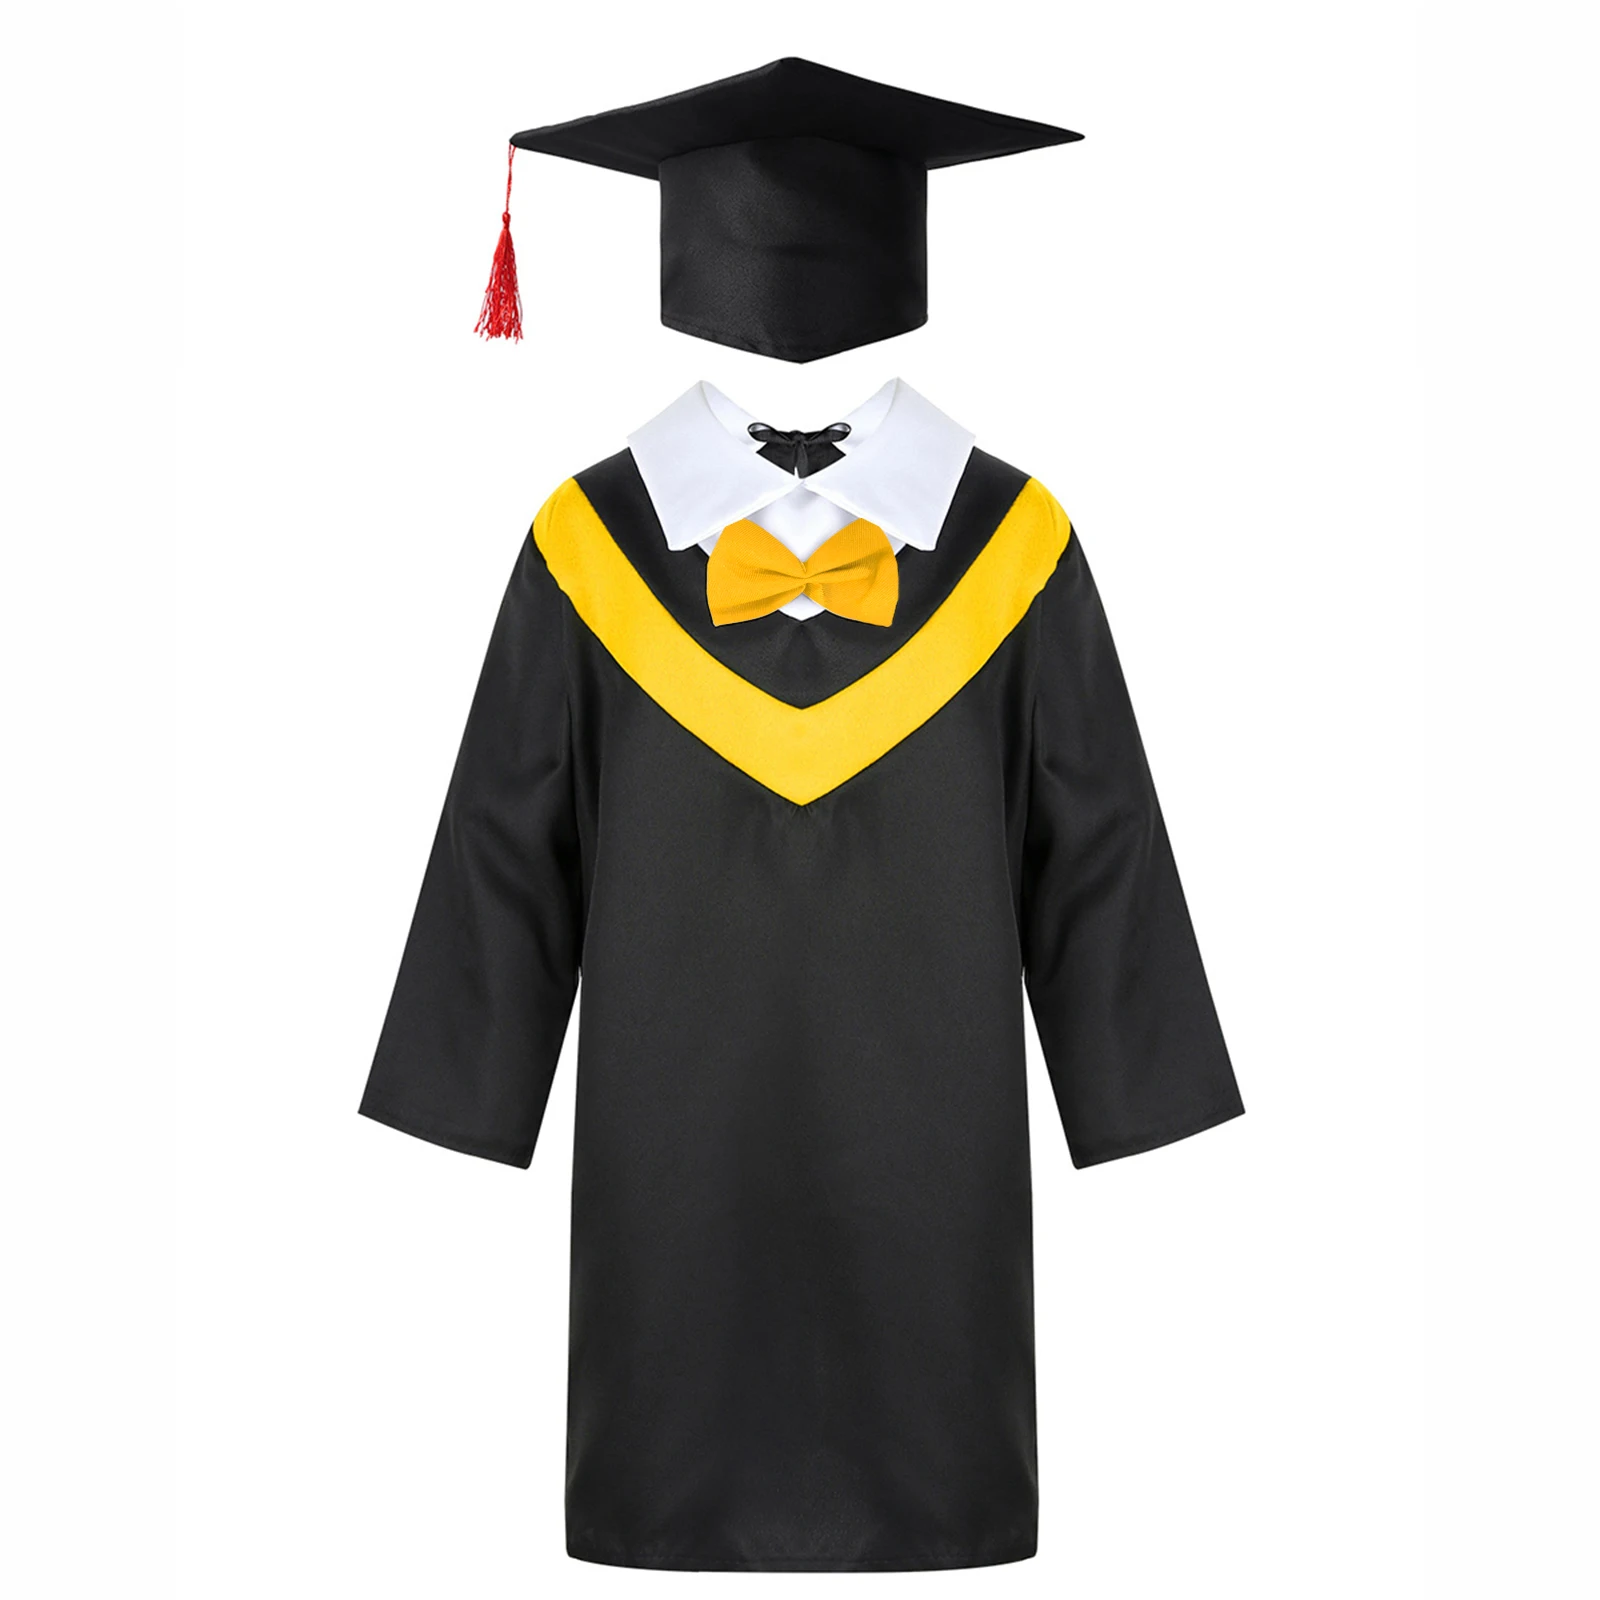 

Primary Bachelor Boys Graduation Graduation Kids Cap With For Girls Play School Costume Tassel Costumes Role Students Gown Gown